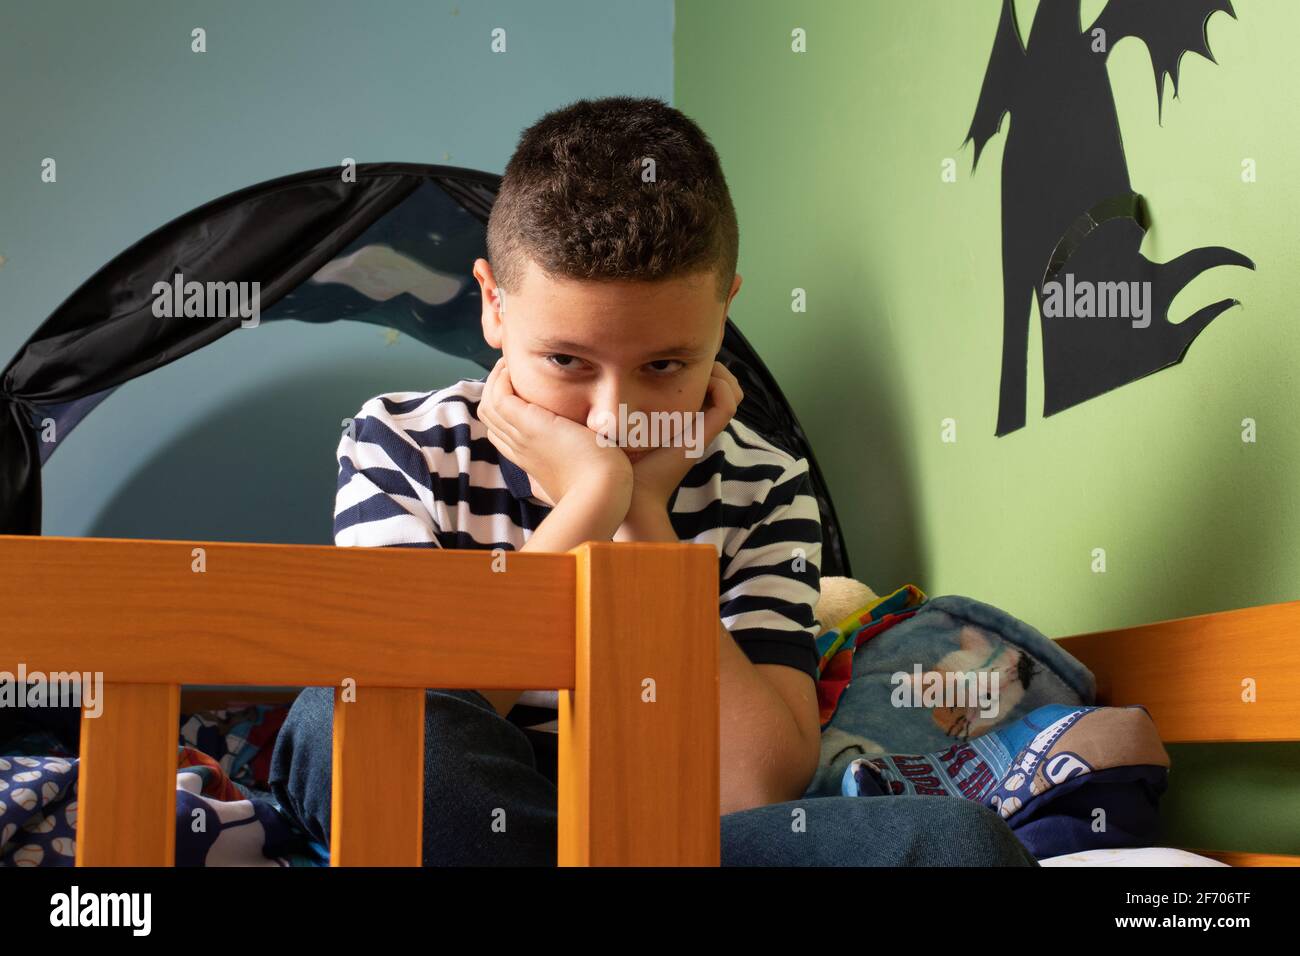 9 year old boy unhappy in bedroom after conflict with parent, resting chin on palms, sitting bed Stock Photo